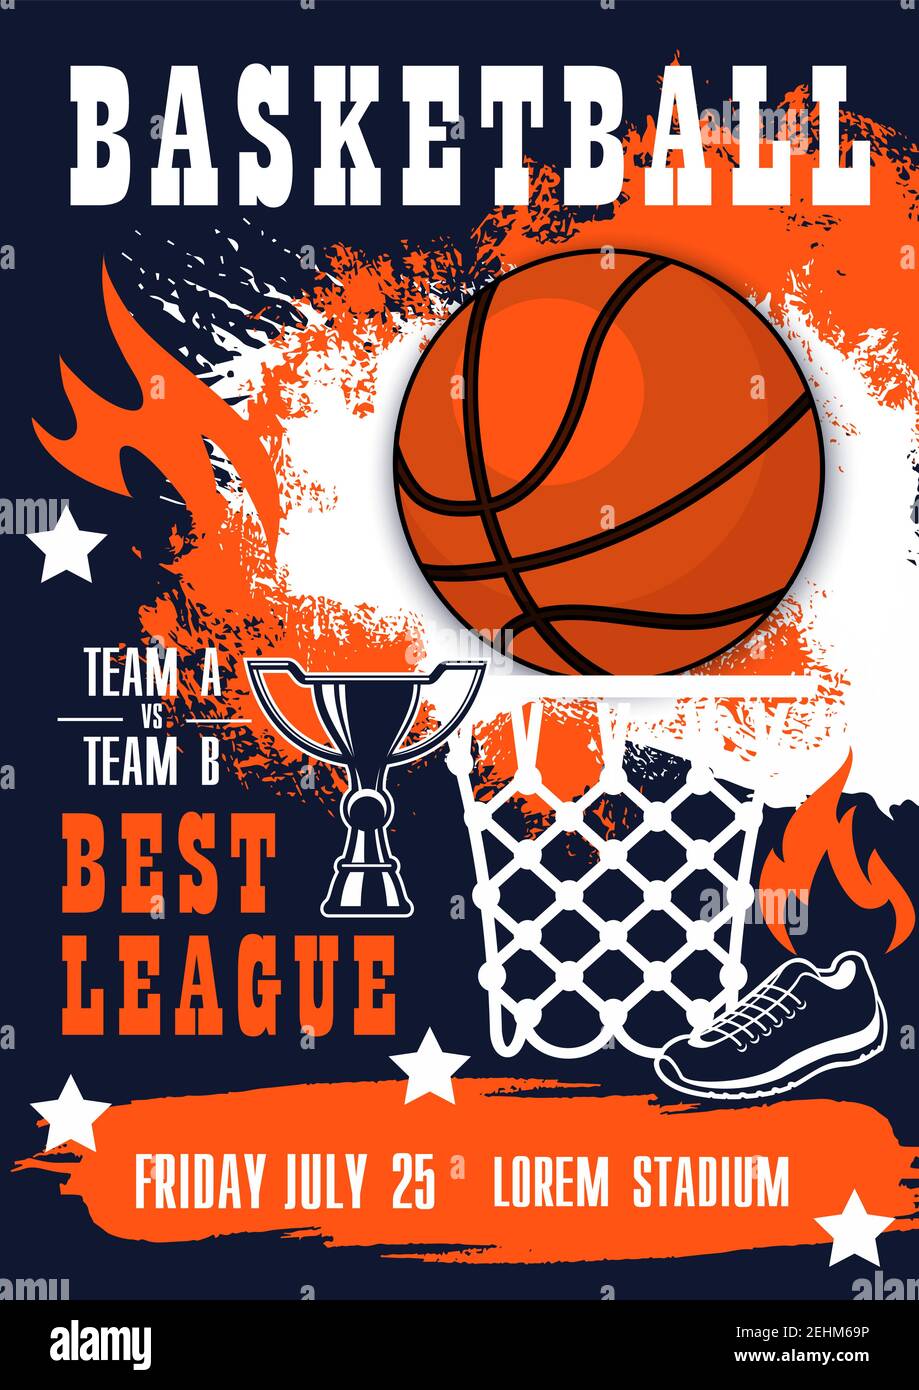 Basketball championship league match banner. Ball, basket, champion trophy cup and boots, decorated with stars and fire flame. Sport game competition Stock Vector